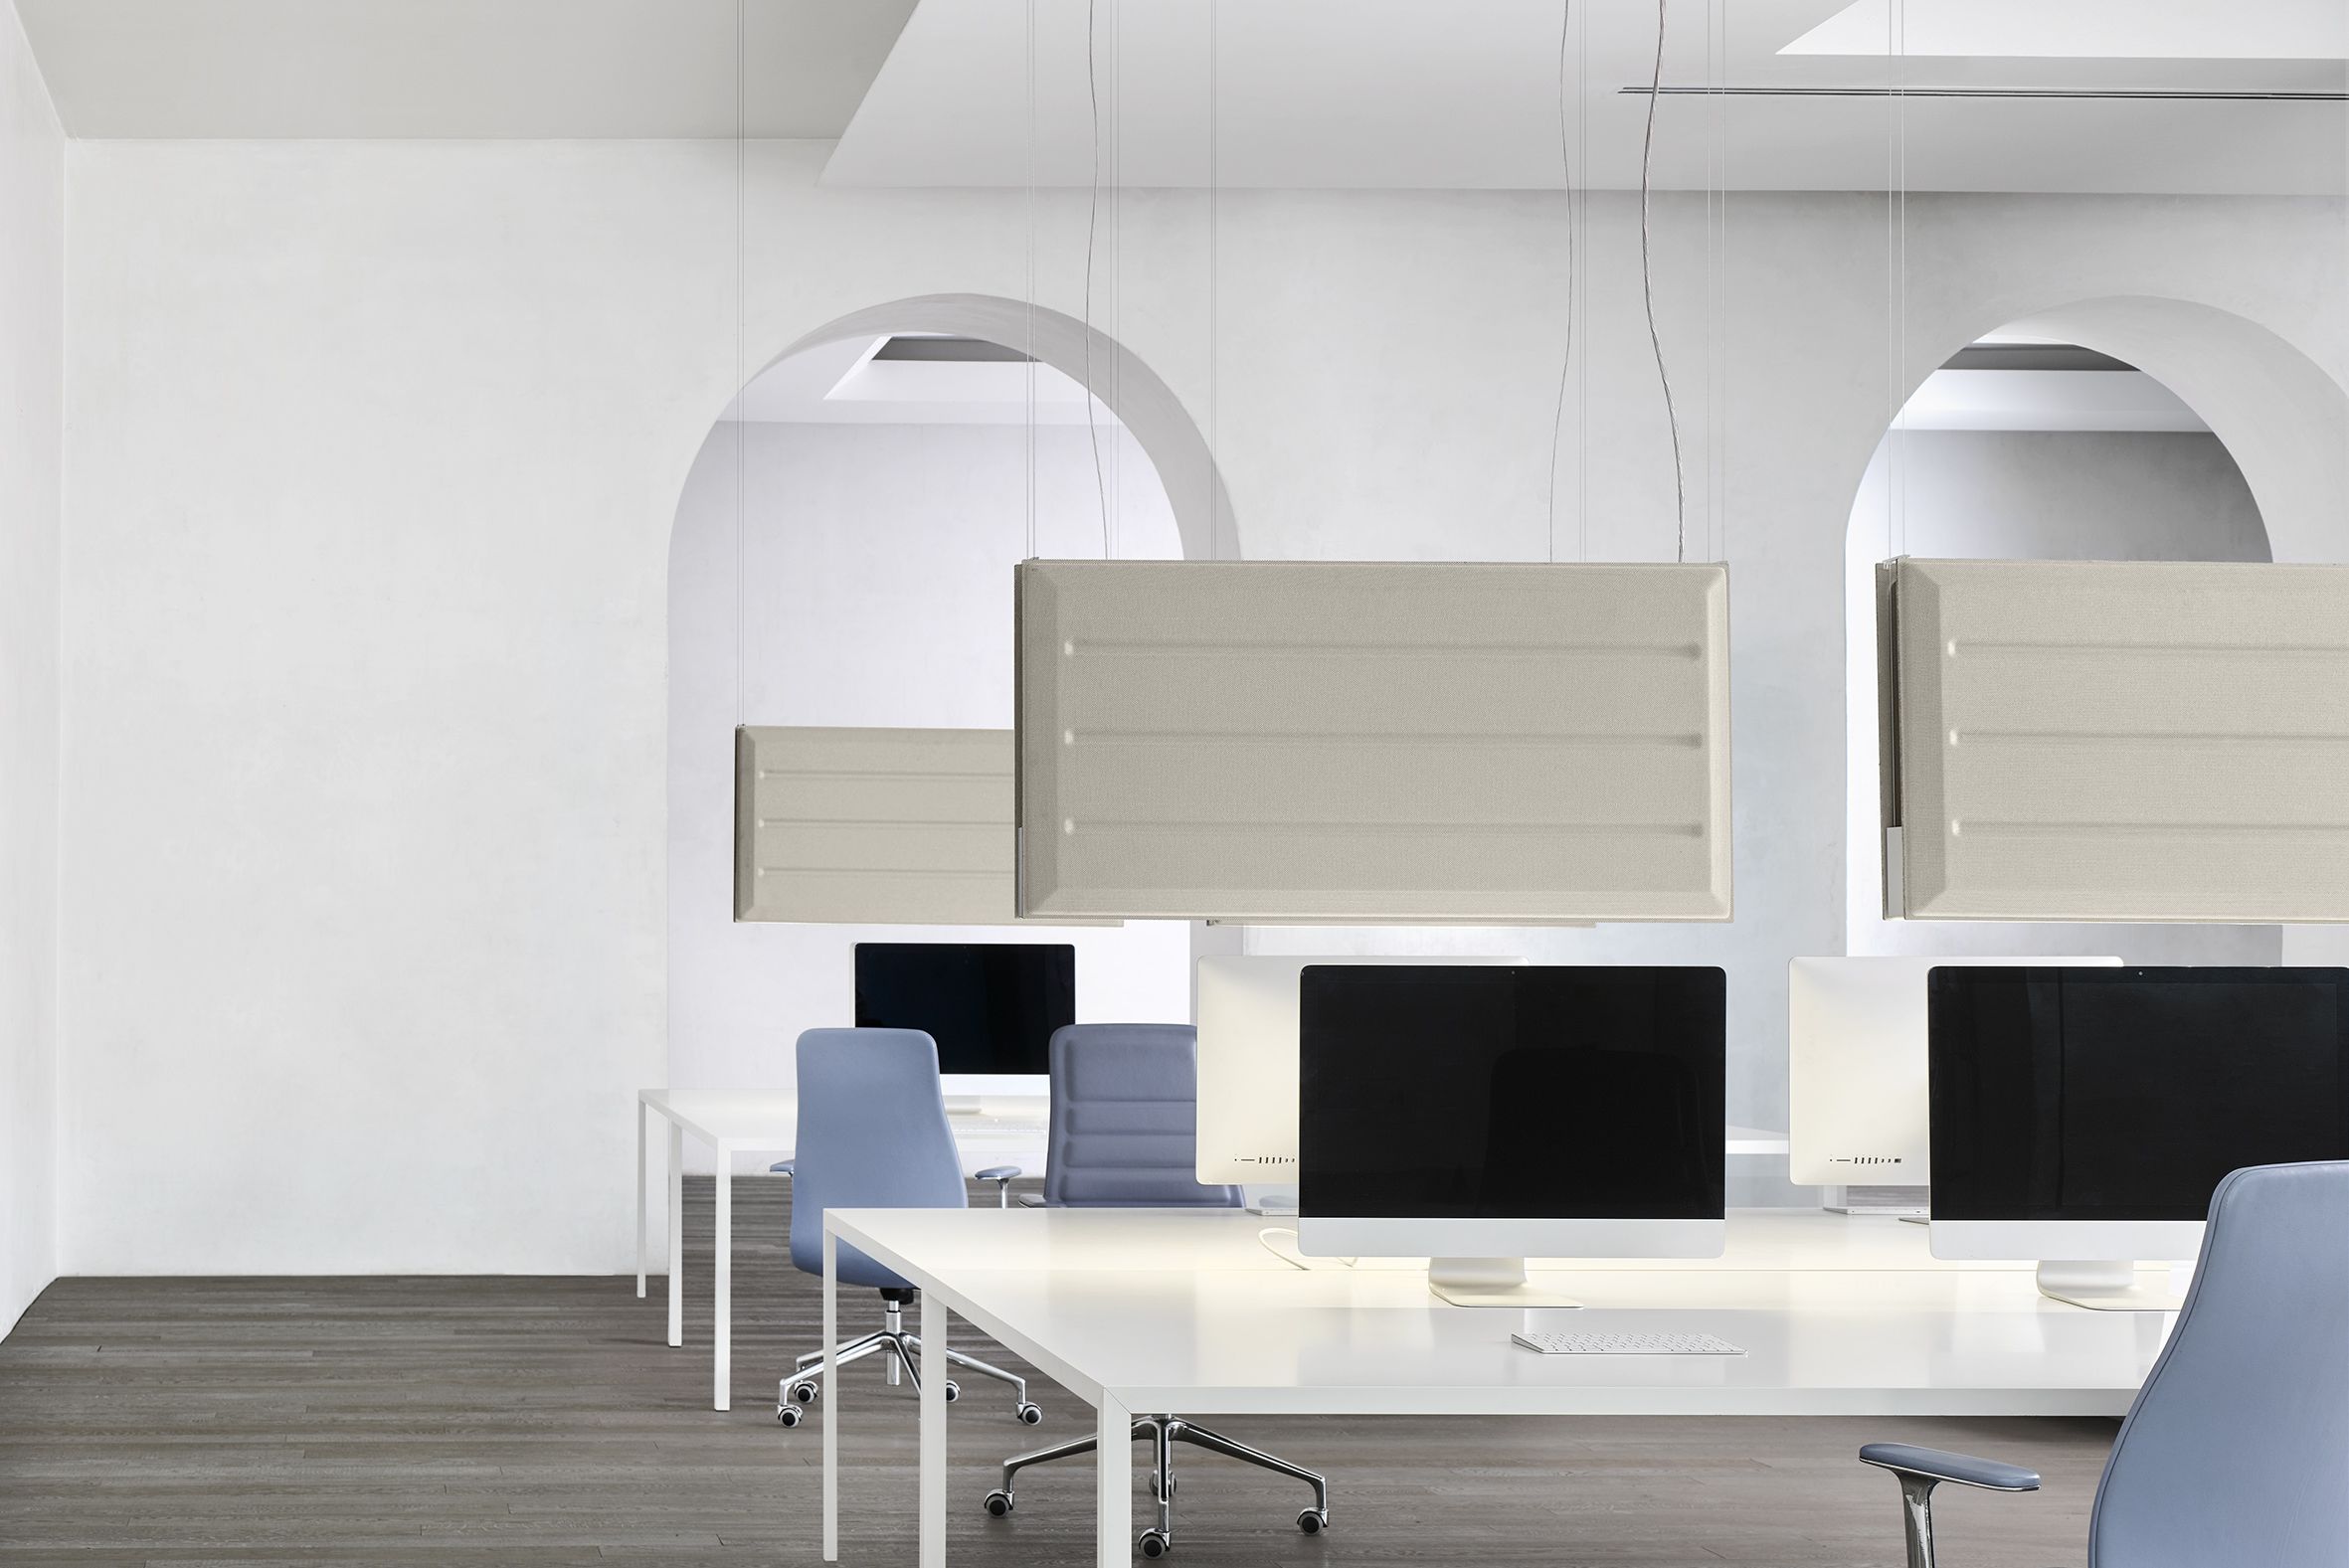 Diade lighting and sound absorption system by Monica Armani for Luceplan